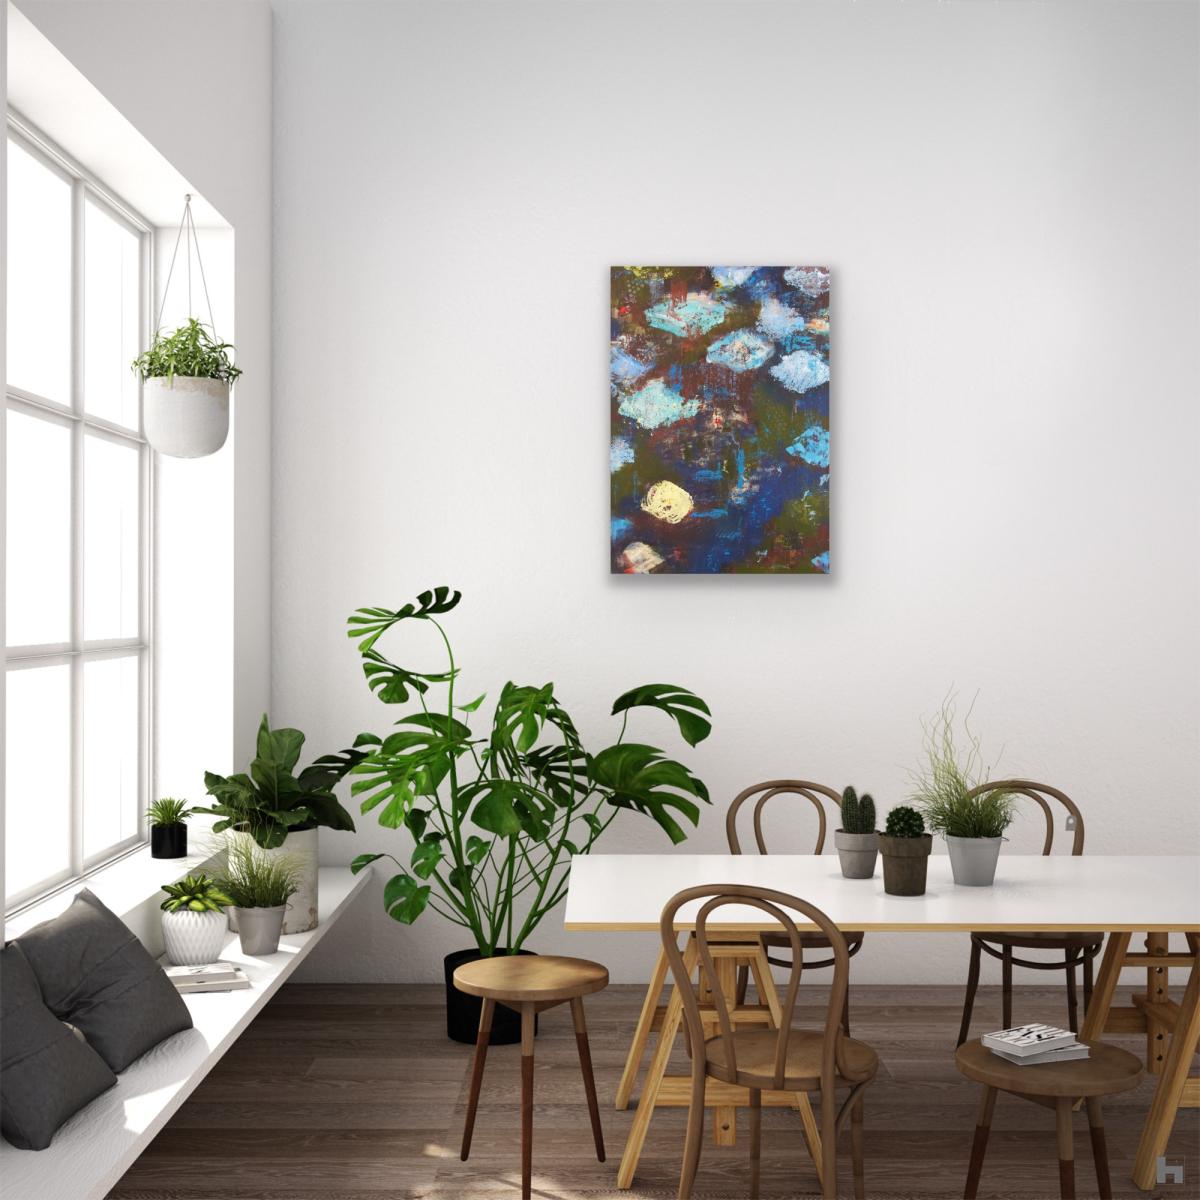 A green and blue abstract painting in a room with a table and house plants